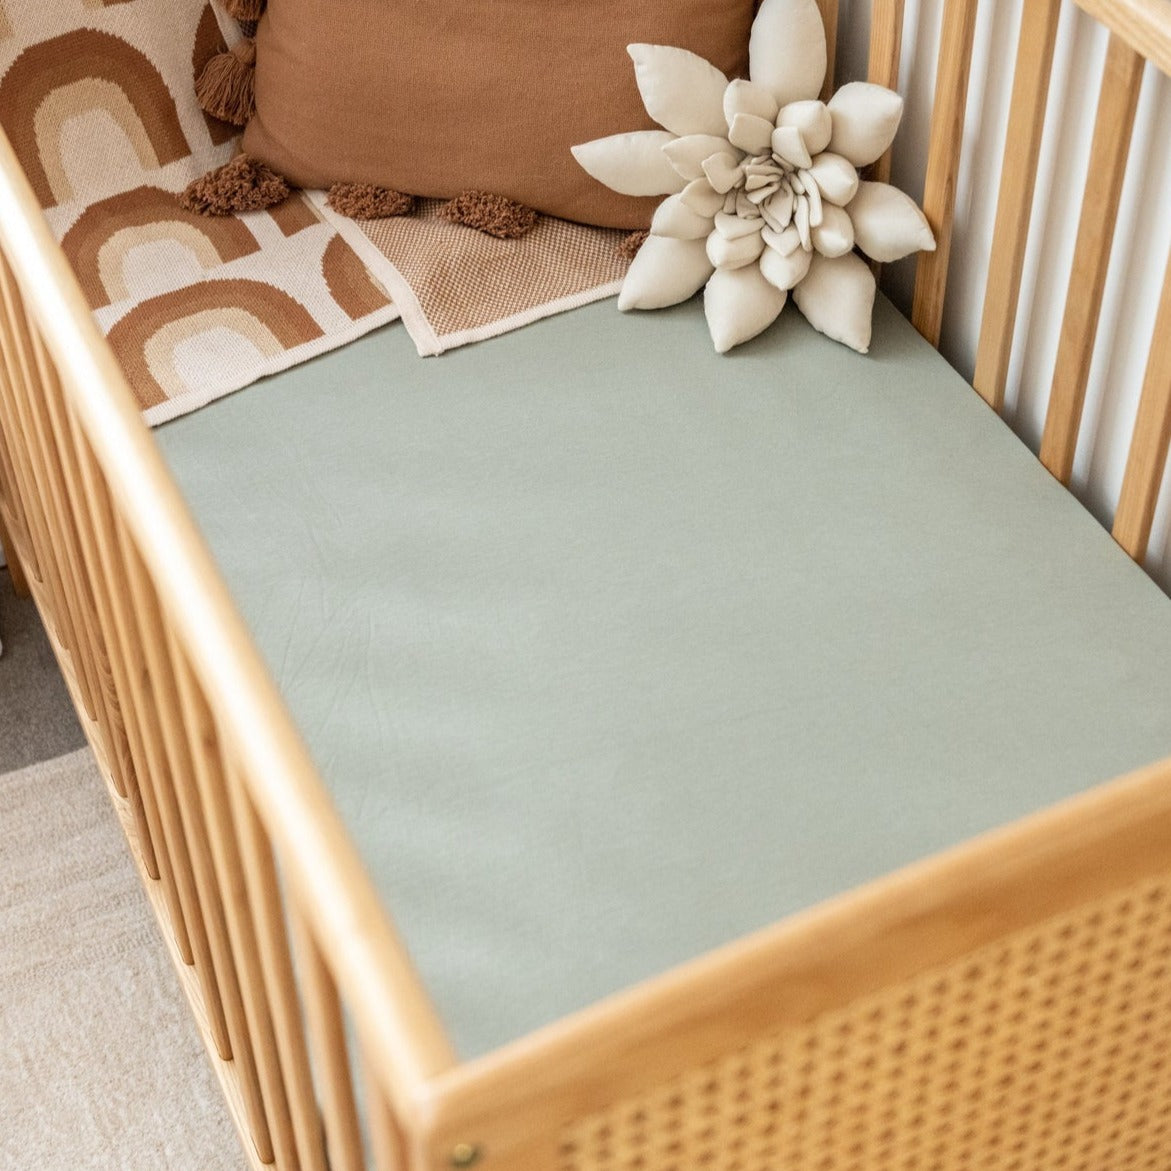 Kiin organic cotton/bamboo fitted cot sheet - angus & dudley